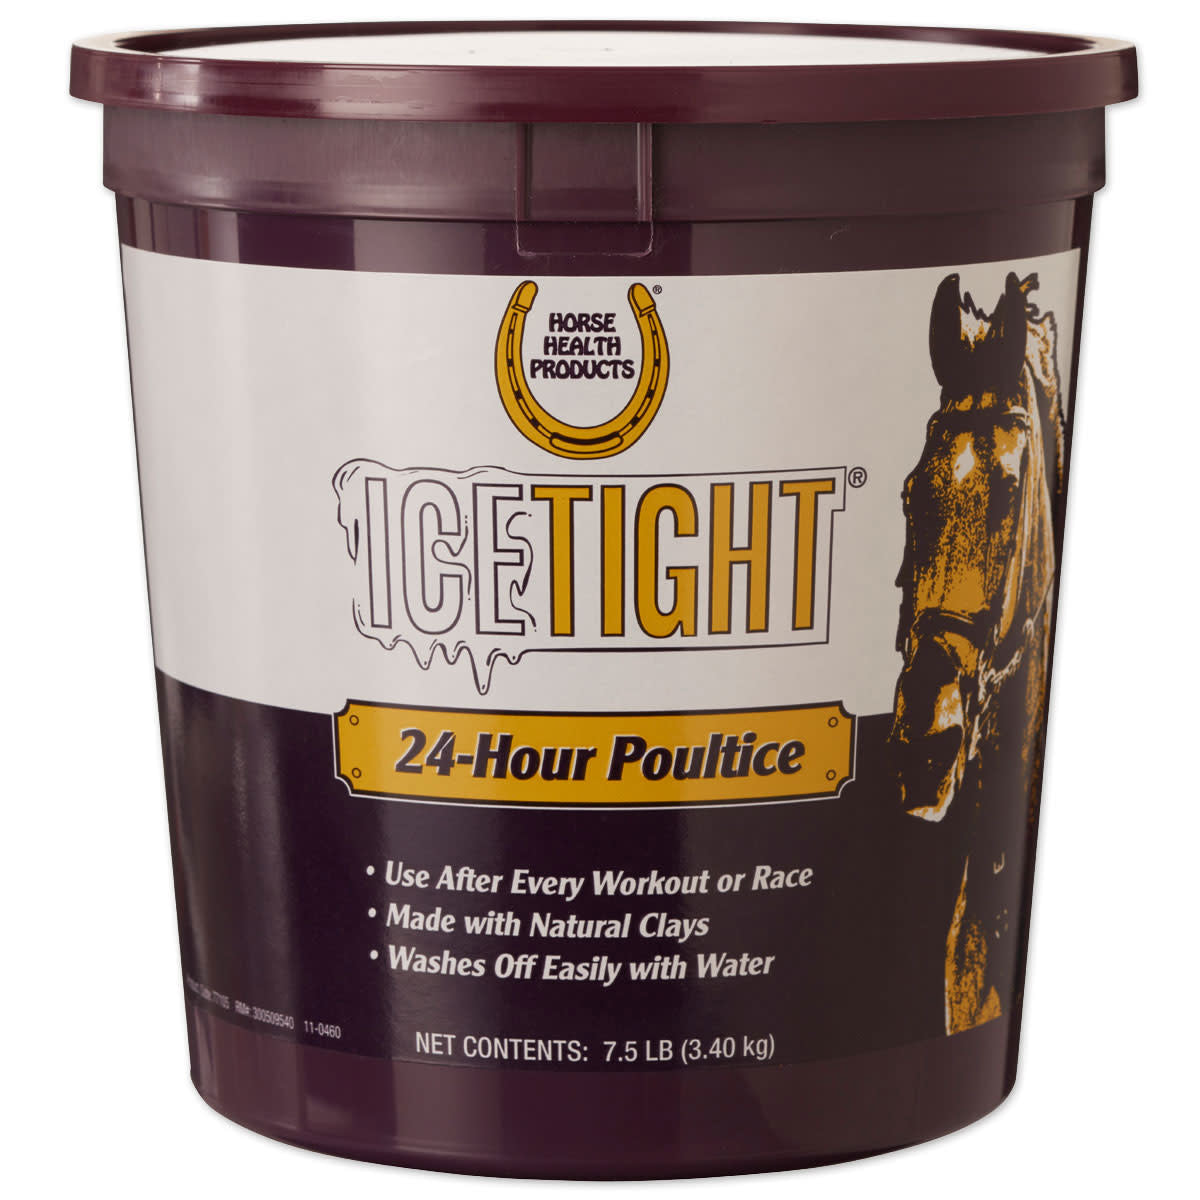 Using a 100% natural clay base, Farnam IceTight is infused with Glycerine and Aloe Vera to create a soothing, relaxing and invigorating leg clay. Lasting up to 24 hours, IceTight can be used as an effective alternative to tubbing, icing or hosing. Durable and top quality clay, Farnam IceTight also washes off quickly and easily for a fresh, enlivened horse with a spring in its step